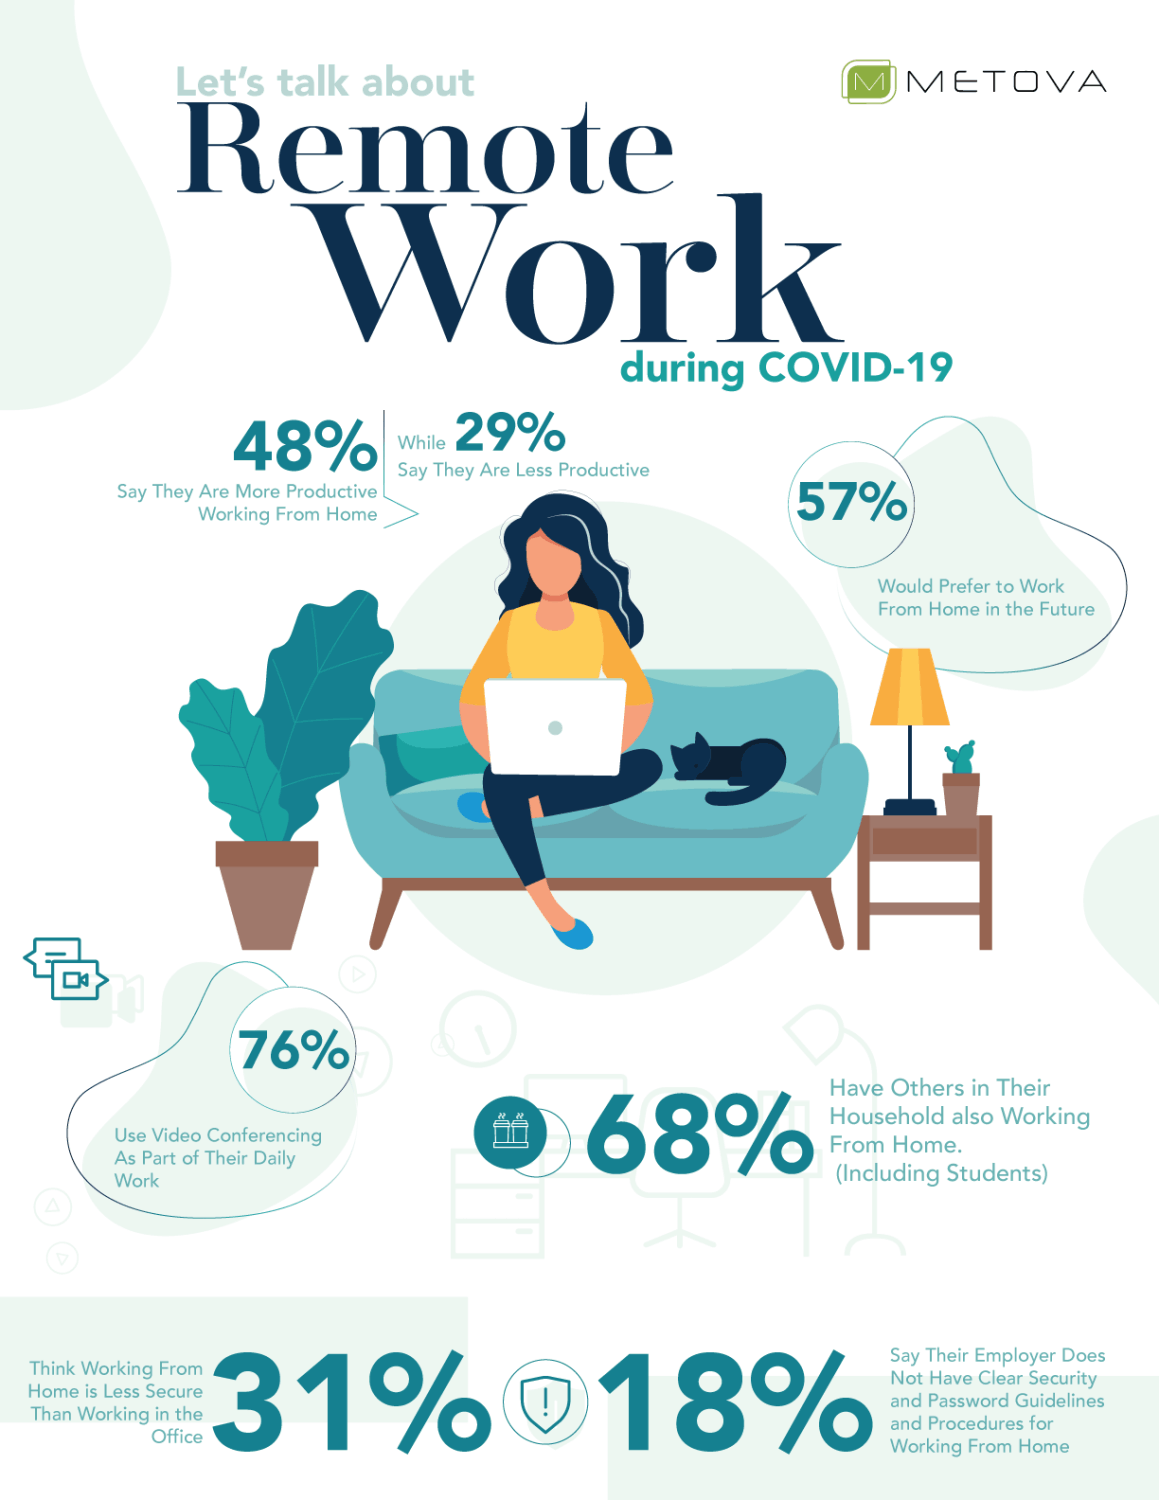 Increased Security Risks of Working From Home